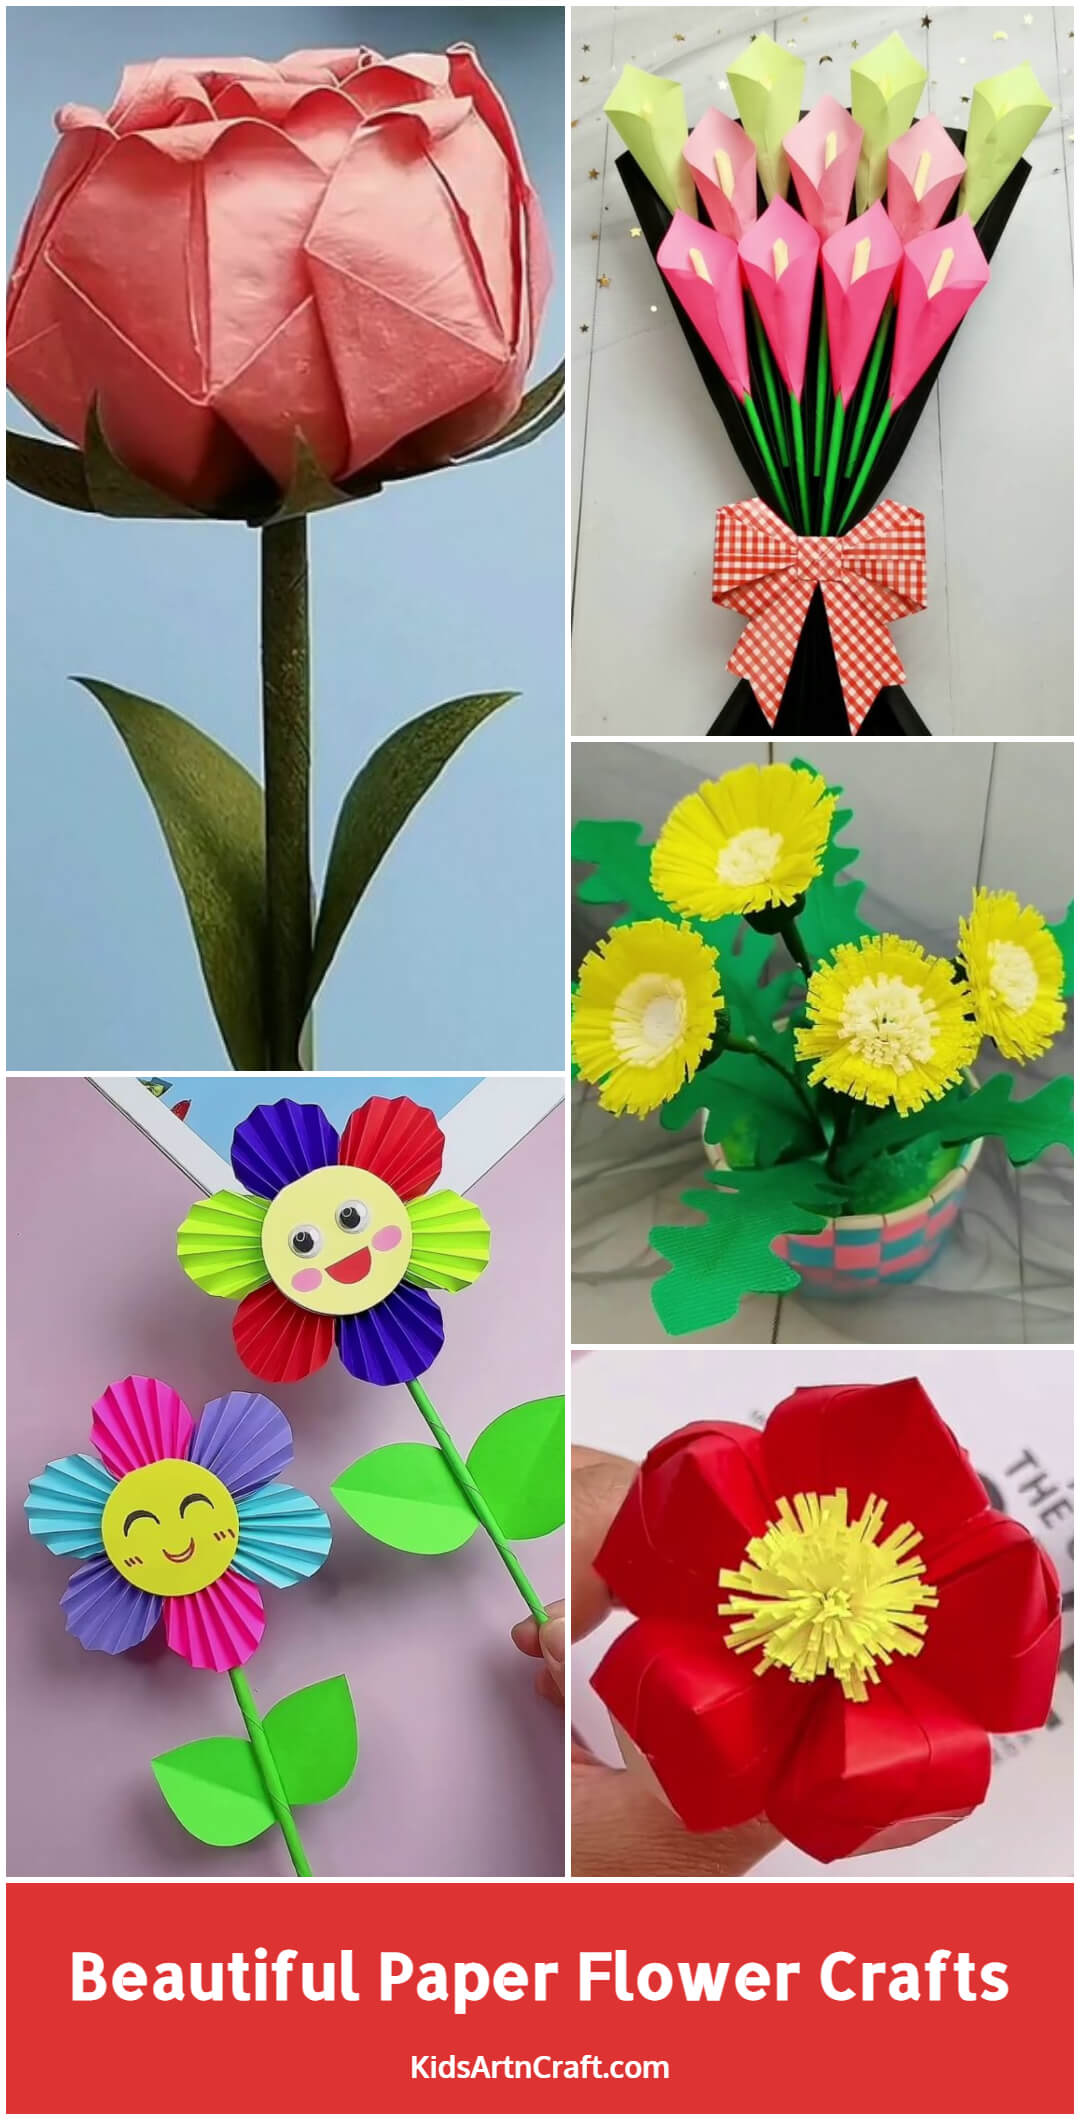  Make Your Home More Elegant With These Beautiful Paper Flower Craft